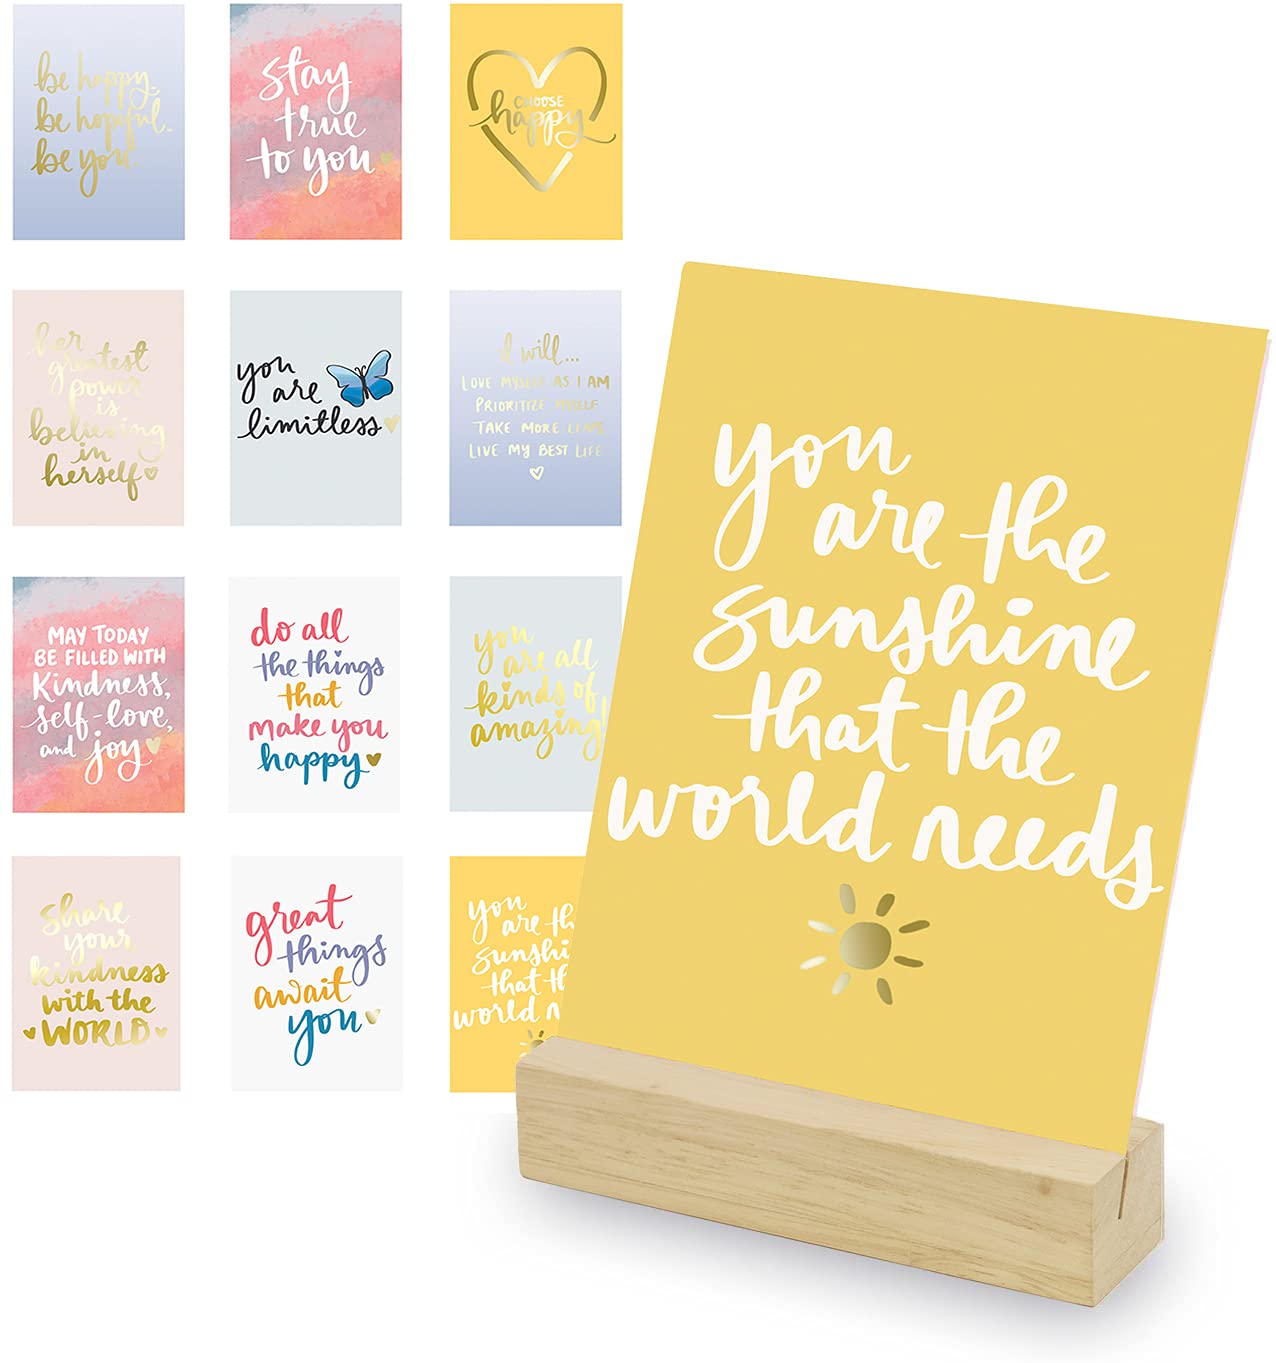 Dayna Lee Cheerful Quotes & Artwork with Wooden Block Desk Stand